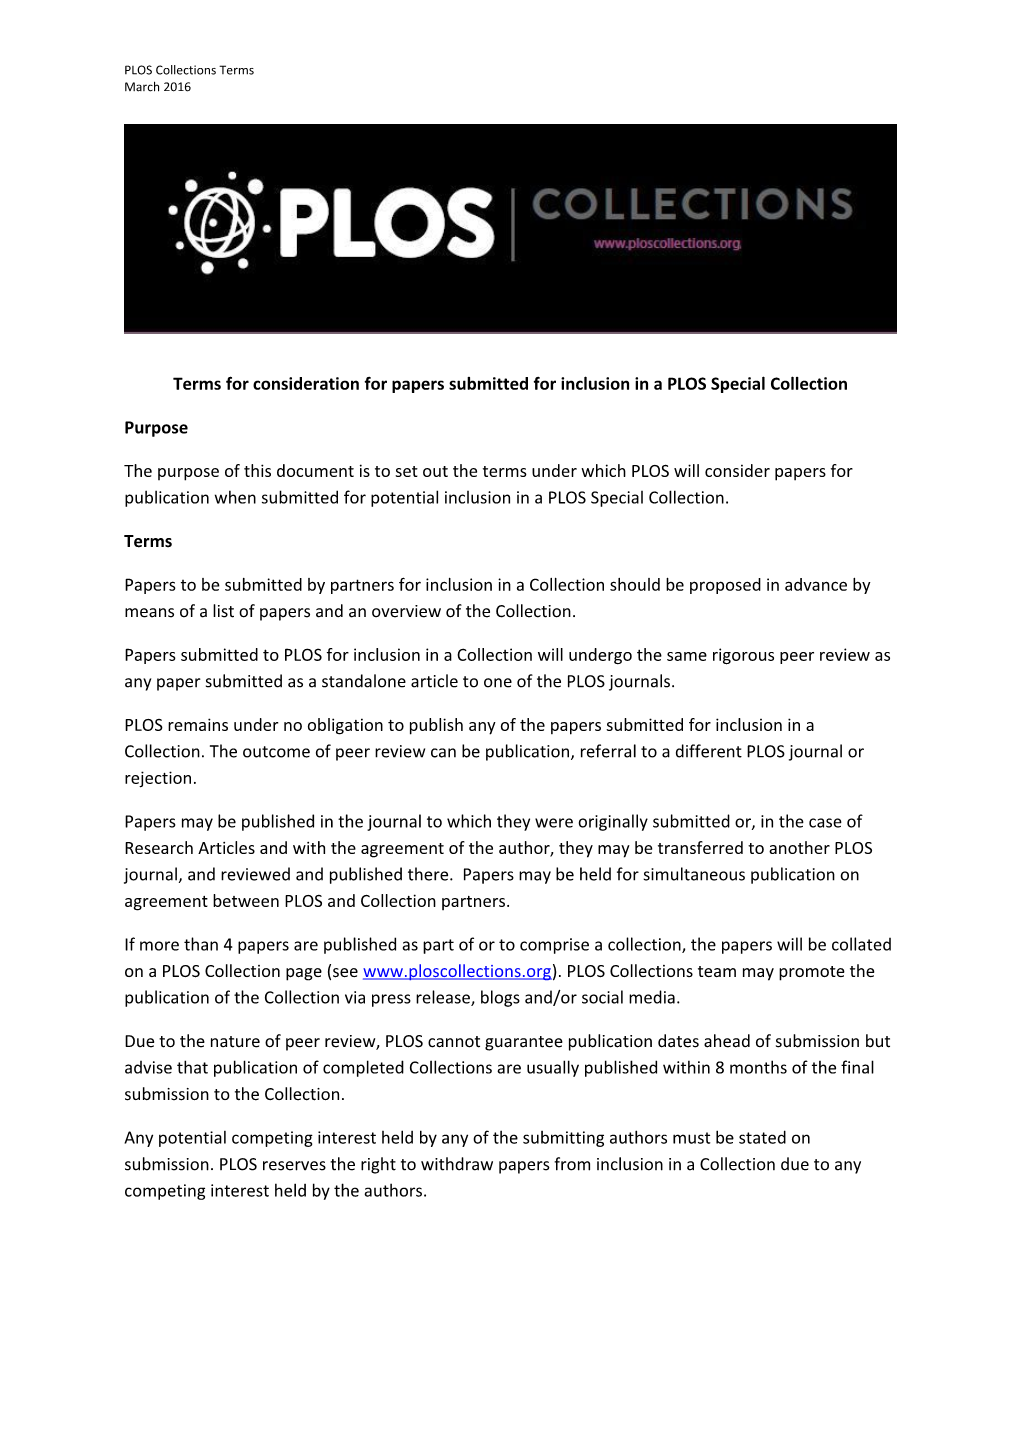 Termsforconsideration for Papers Submitted for Inclusion in a PLOS Special Collection